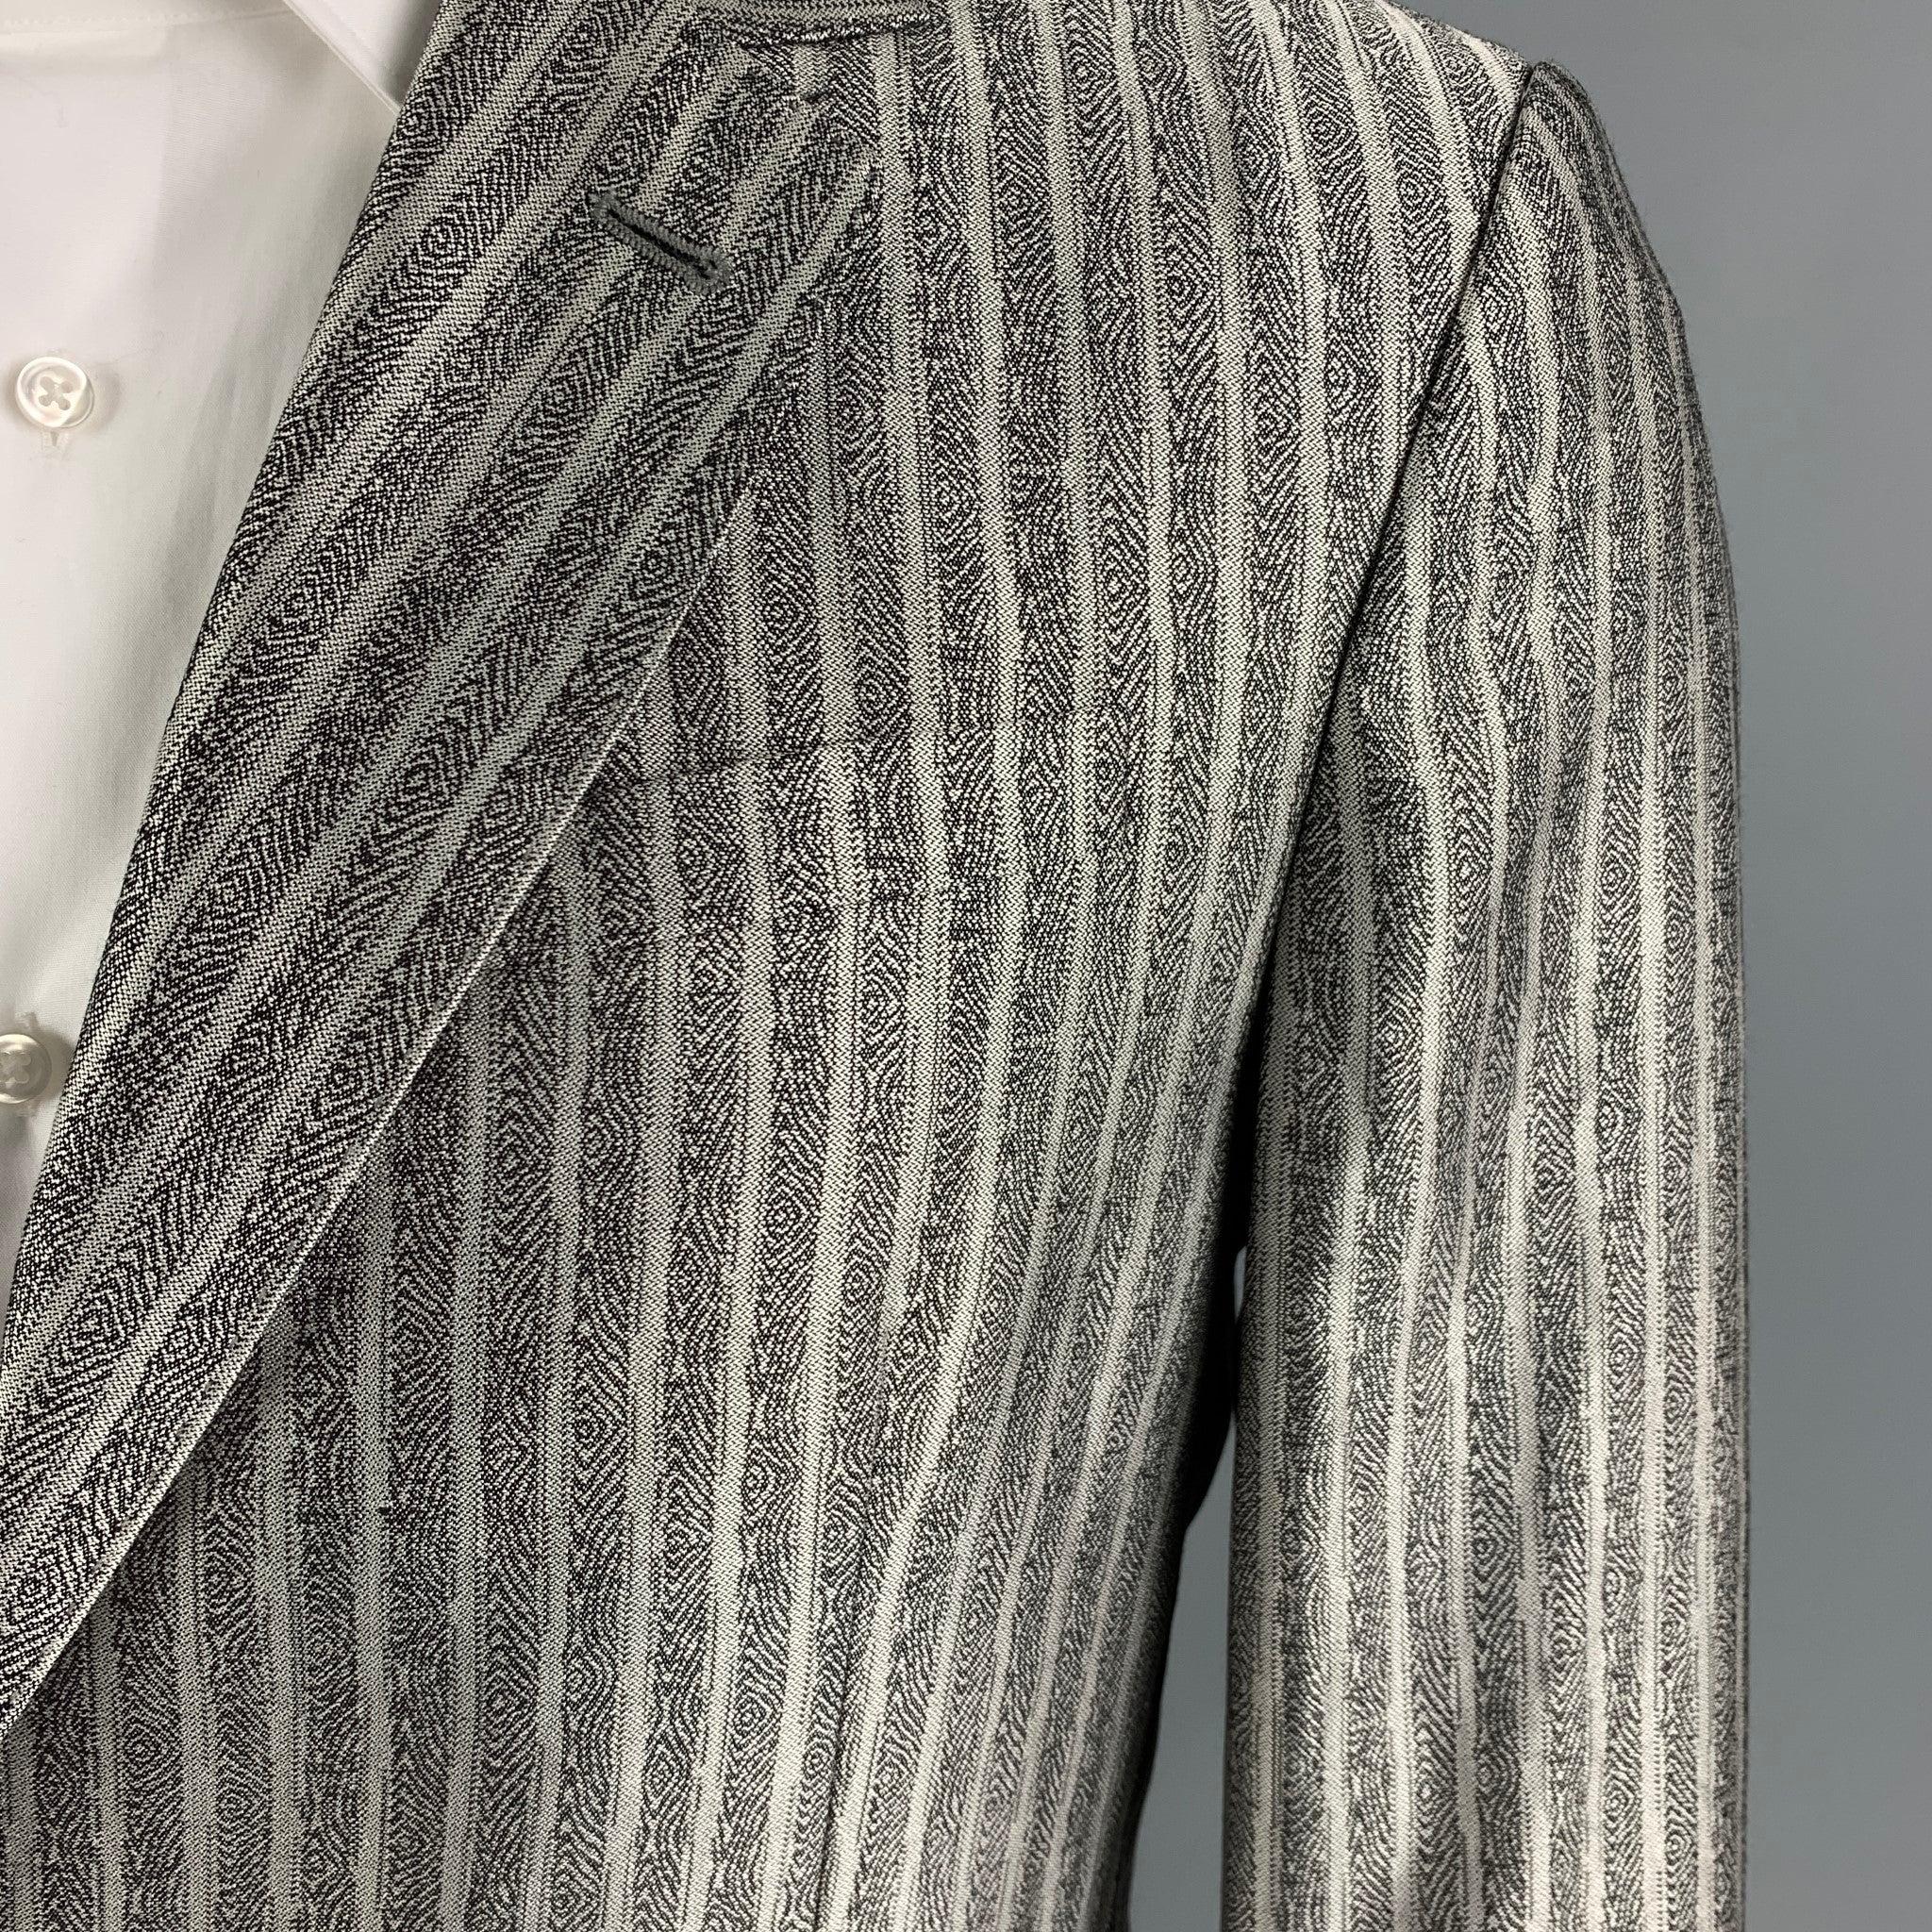 ROBERTO CAVALLI spot coat comes in a silver & black wool / silk with a full liner featuring a notch lapel, flap pockets, single back vent, and a double button closure. Made in Italy.
New With Tags. 

Marked:   50 

Measurements: 
 
Shoulder: 18